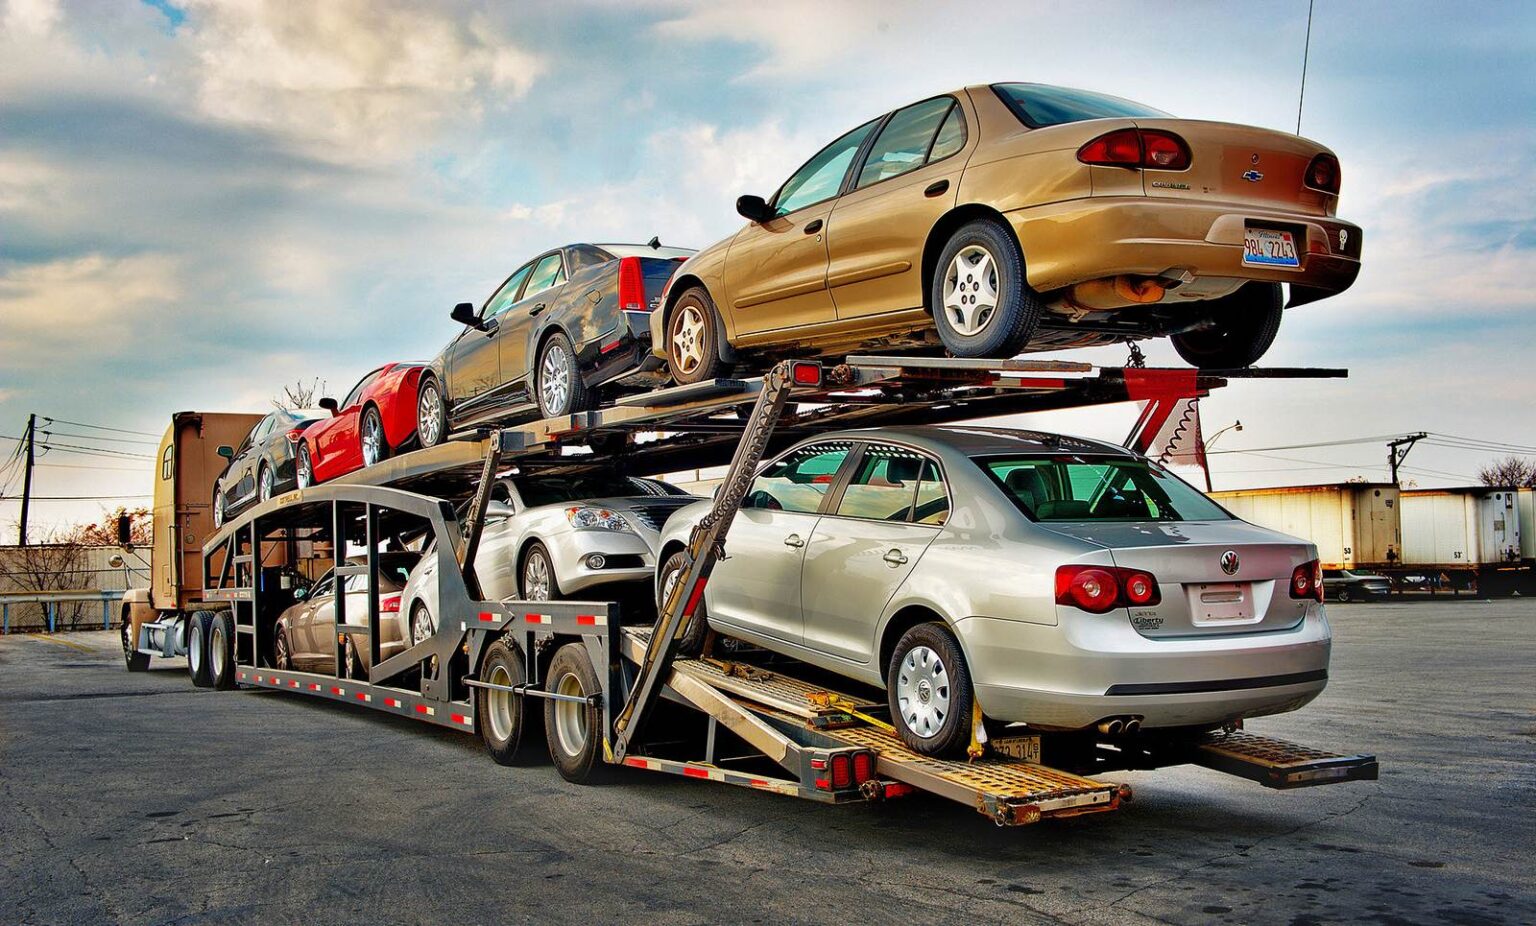 Picking the right car shipping company is essential. Here are some tips on how to choose the perfect company for you.